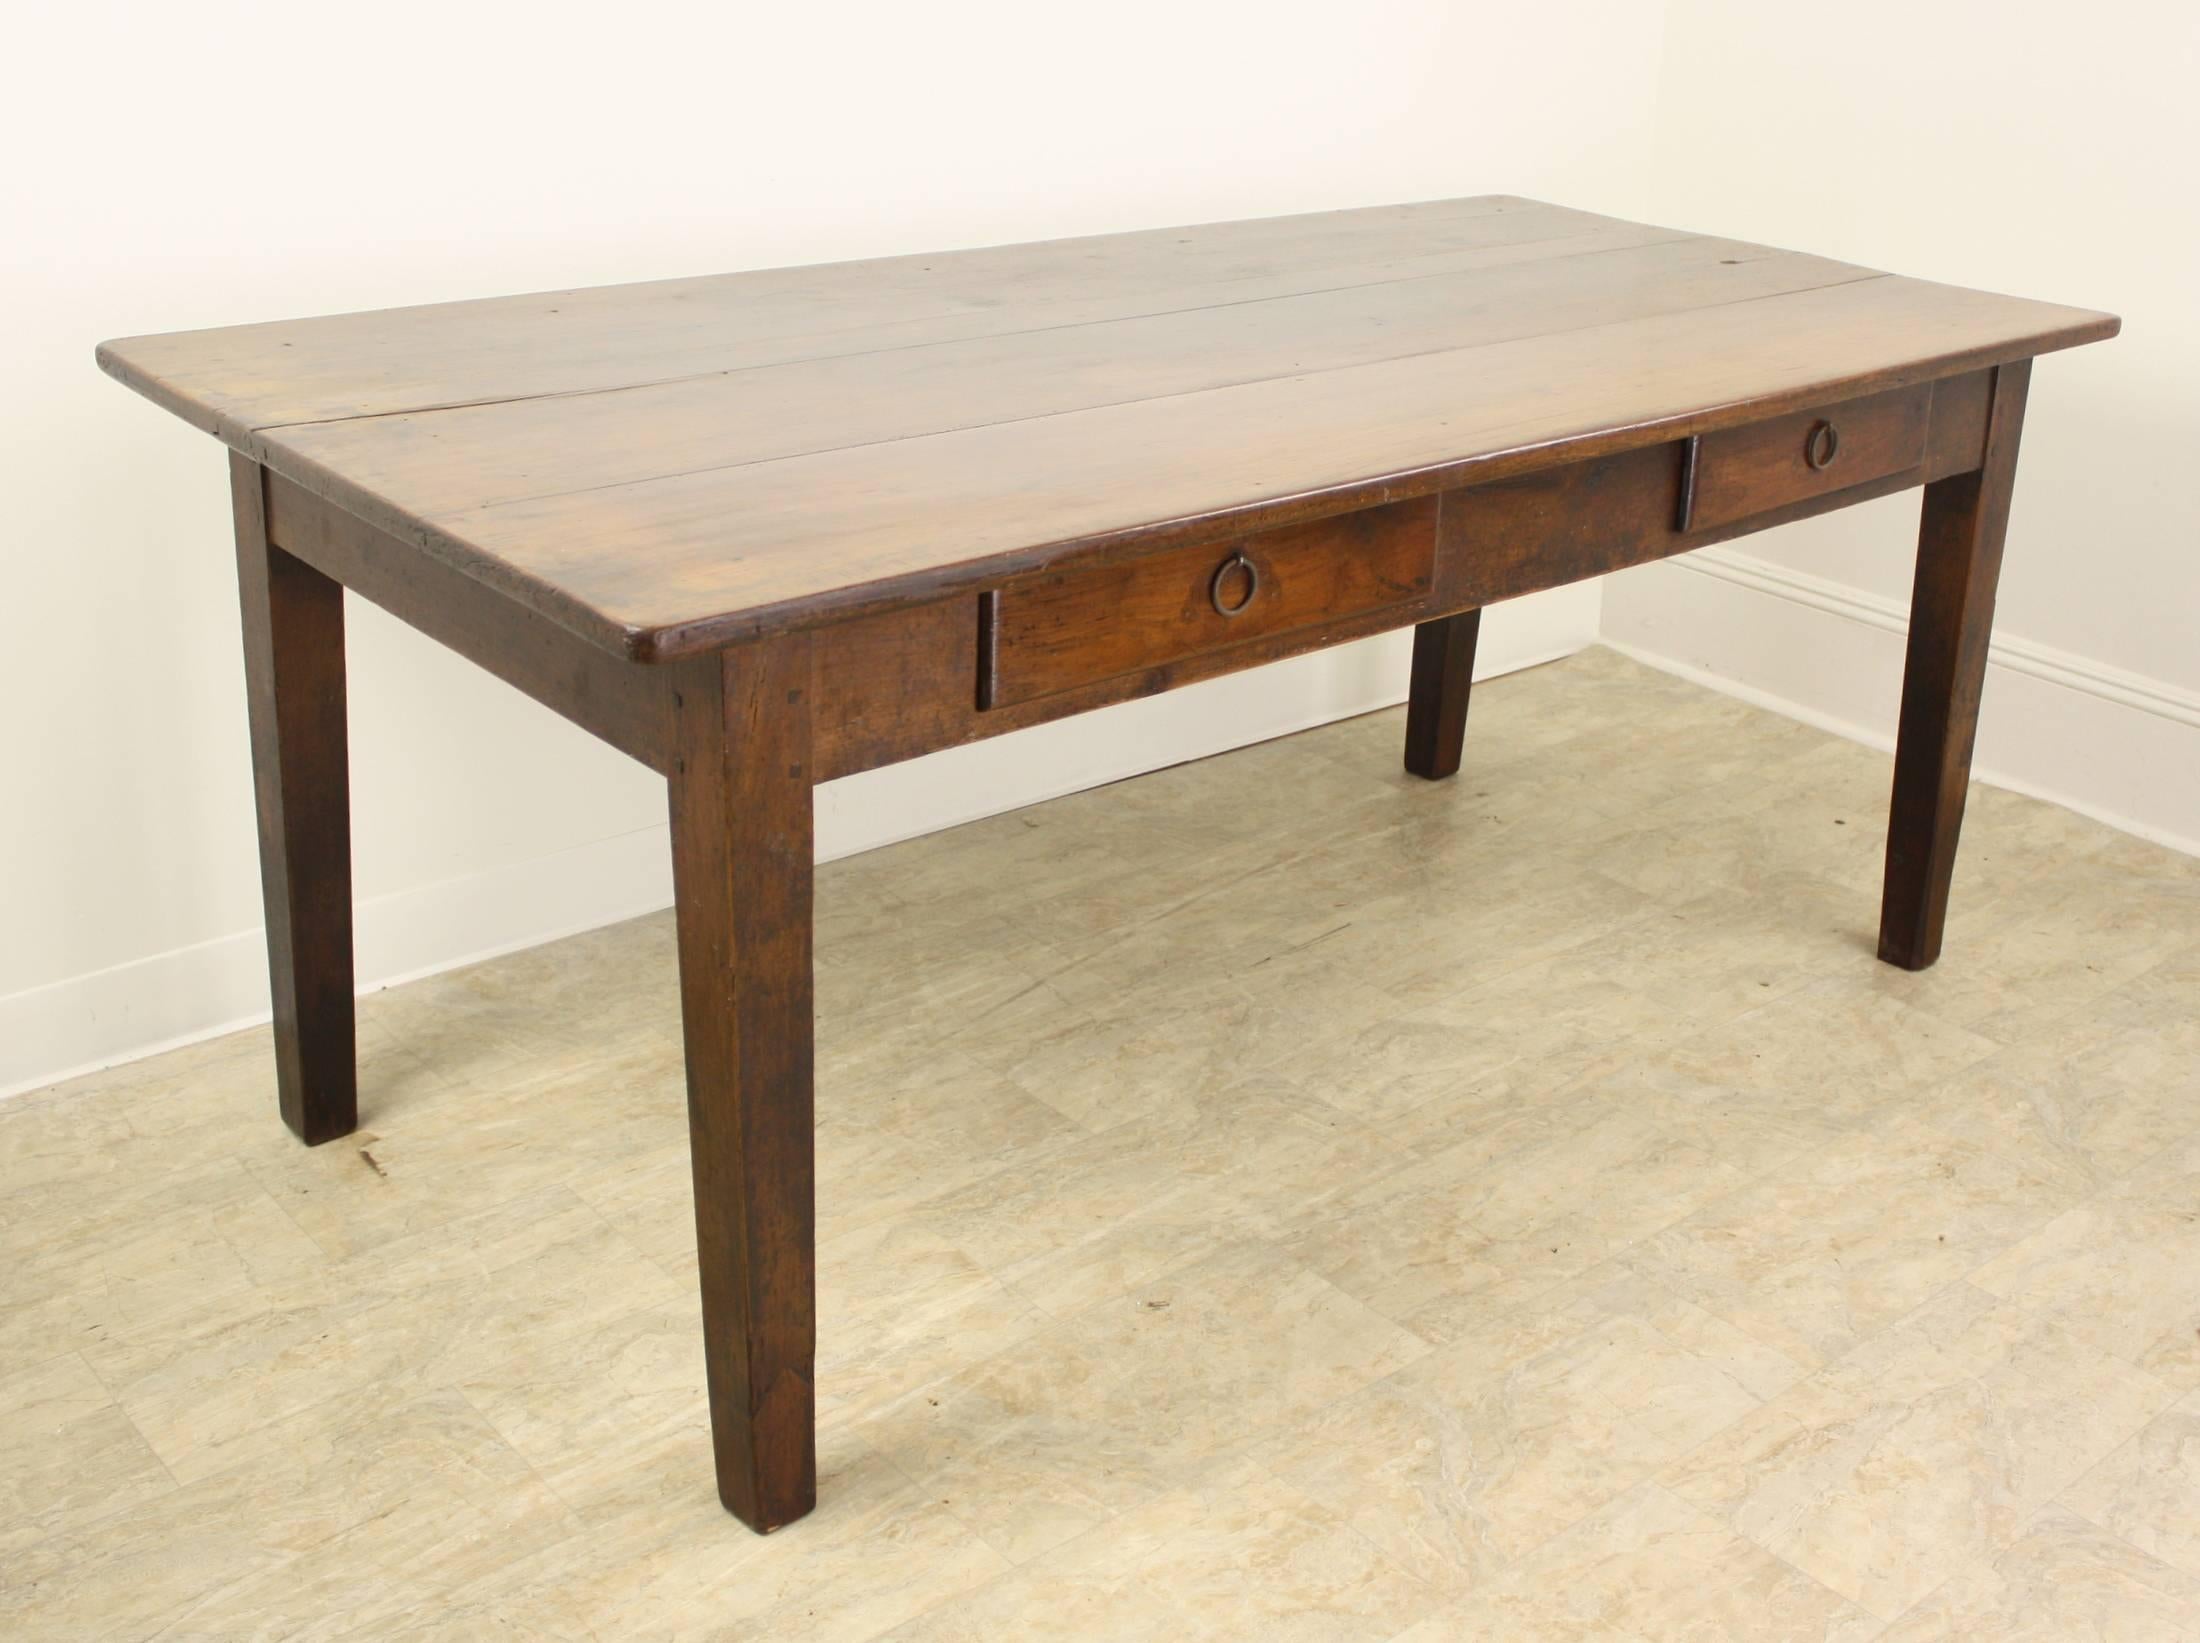 Six feet long, with a nice depth, this very attractive French cherry farm table offers a beautiful color and patina, and two drawers in the apron on one long side. Legs are Classic tapered slender legs. The apron height is a good comfortable 24